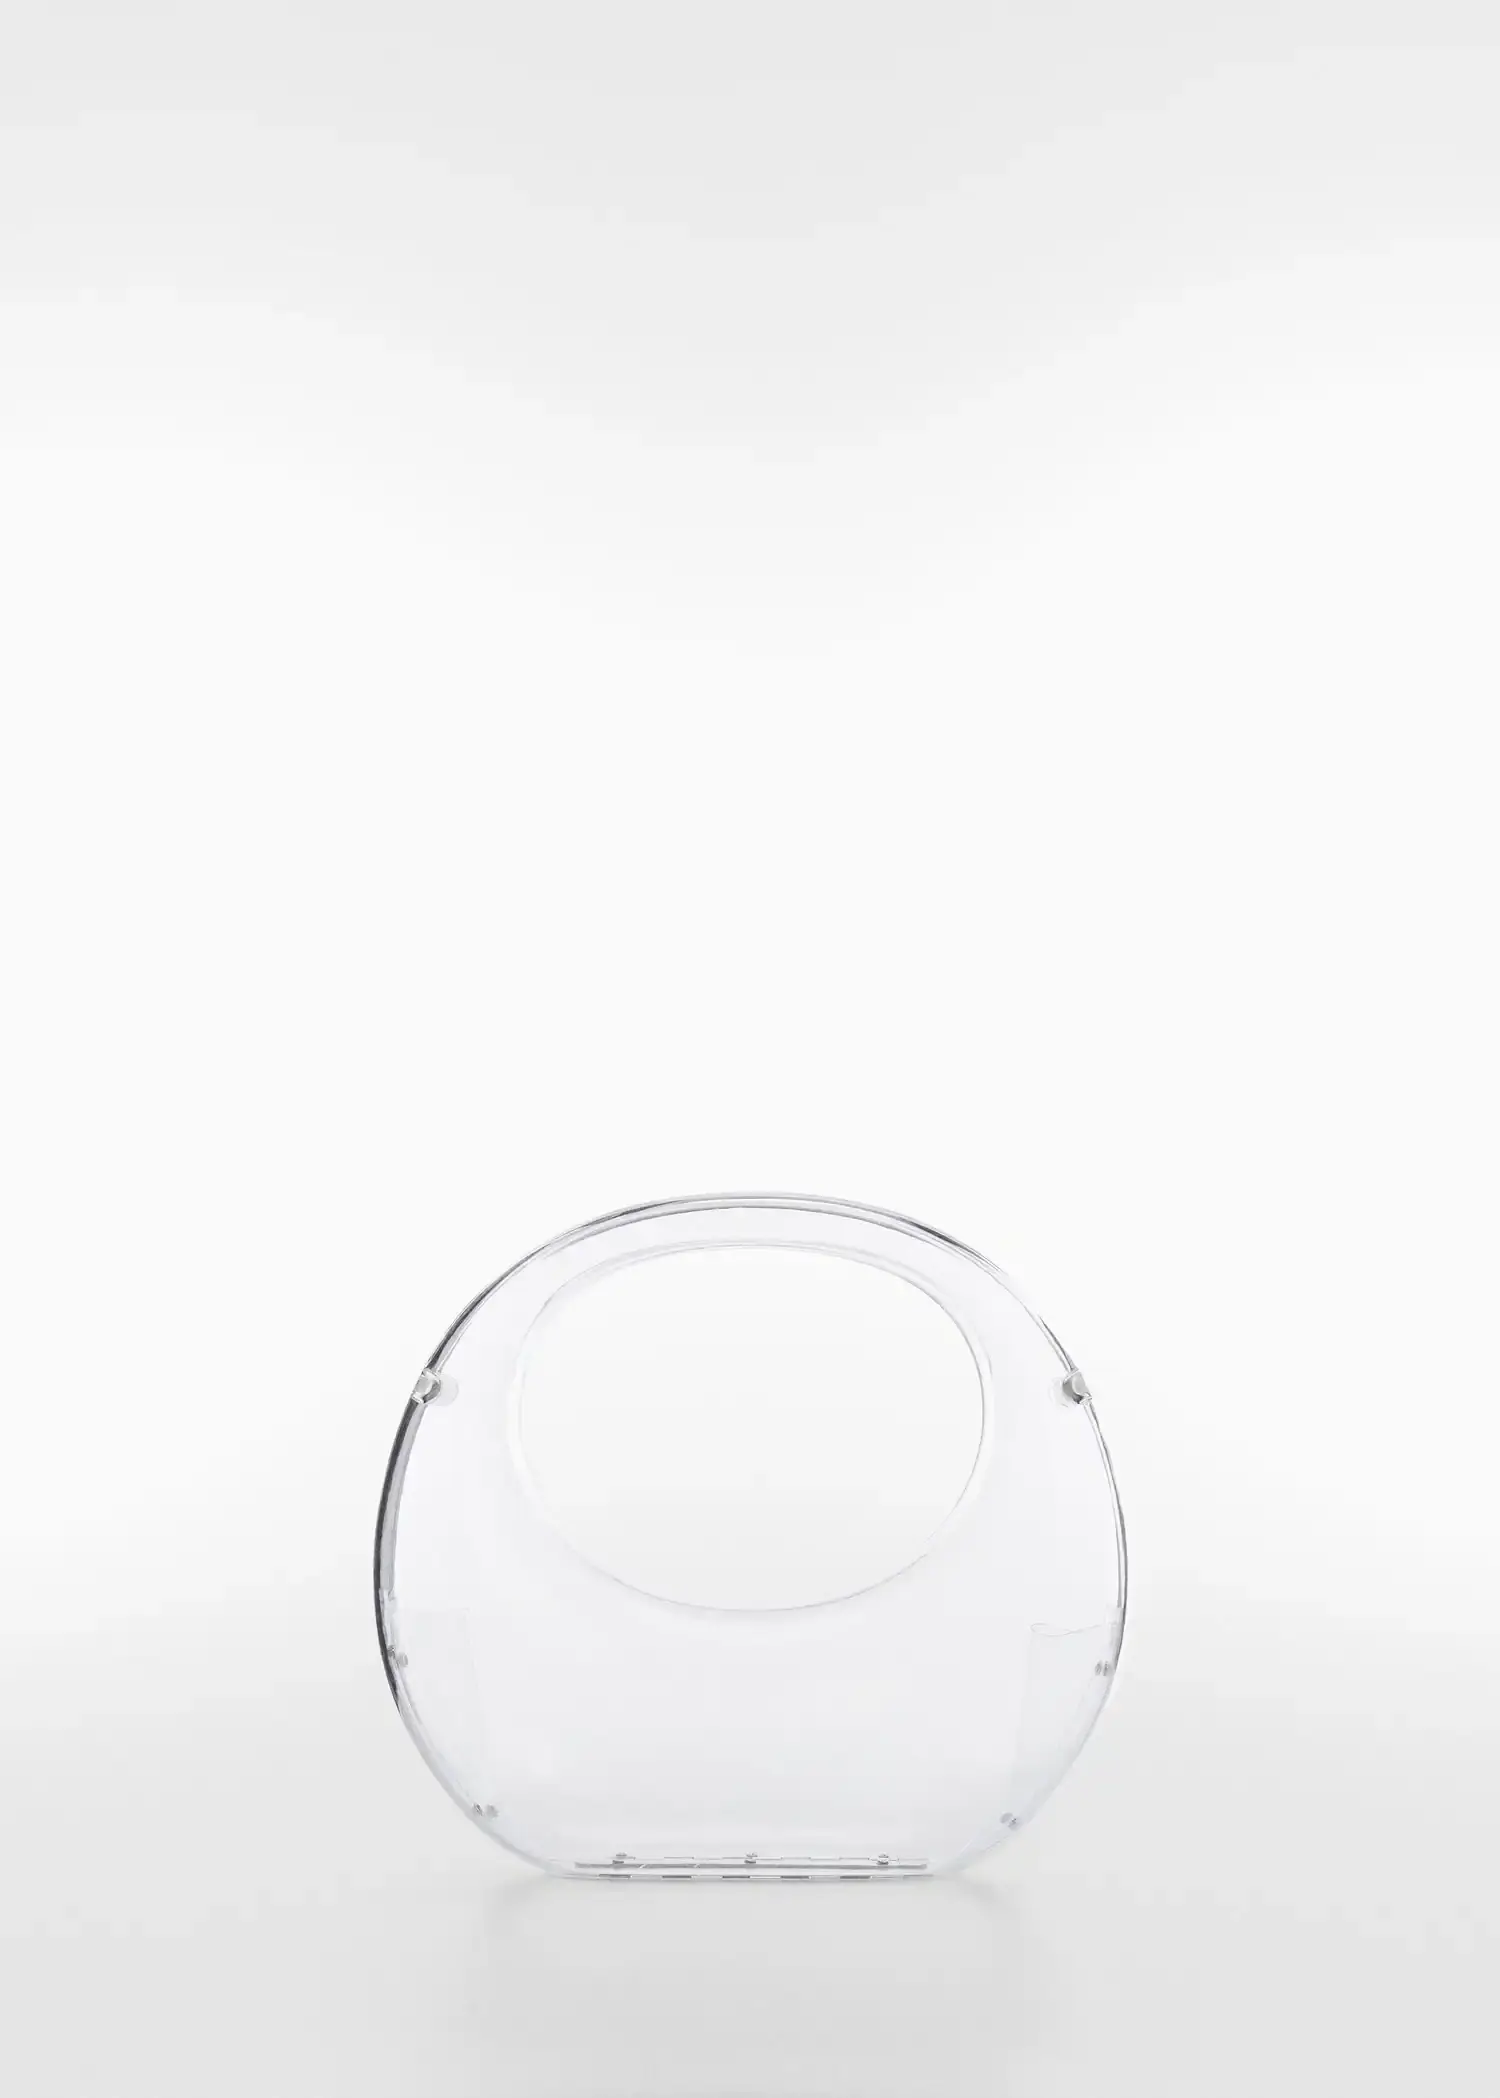 Mango Transparent rigid bag. an empty glass purse sitting on top of a white table. 